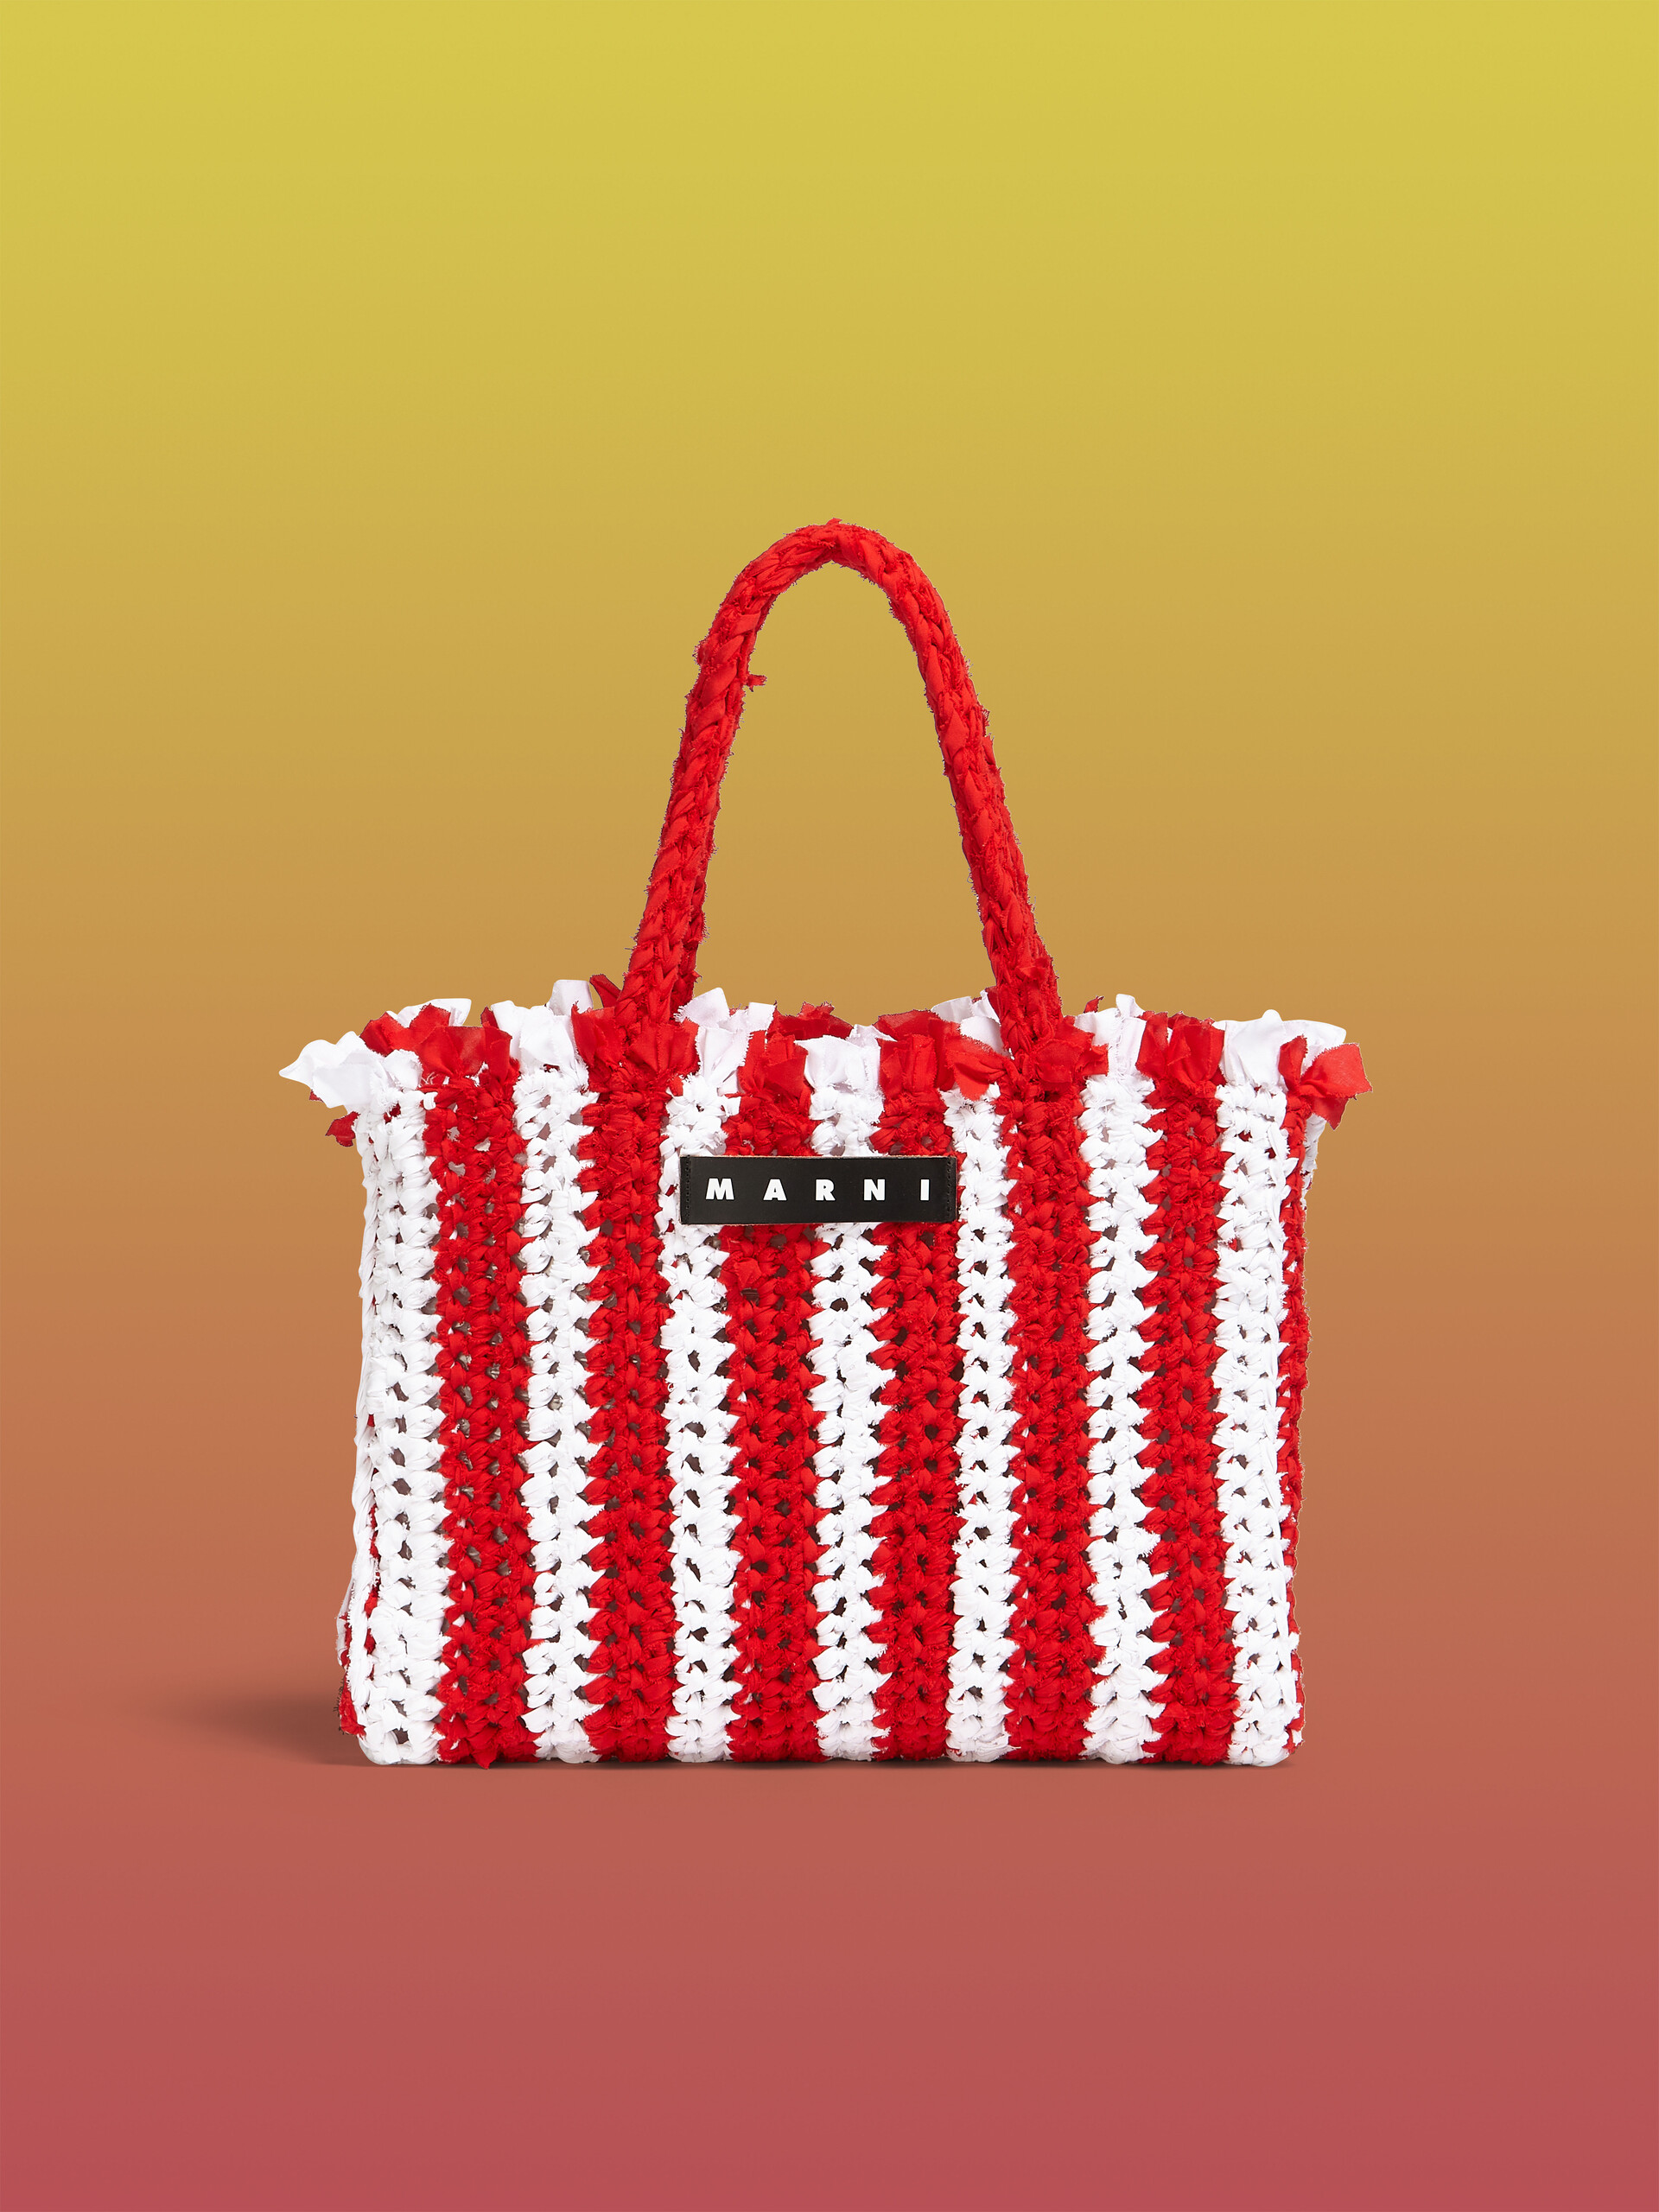 MARNI MARKET bag in white and red cotton - Bags - Image 1